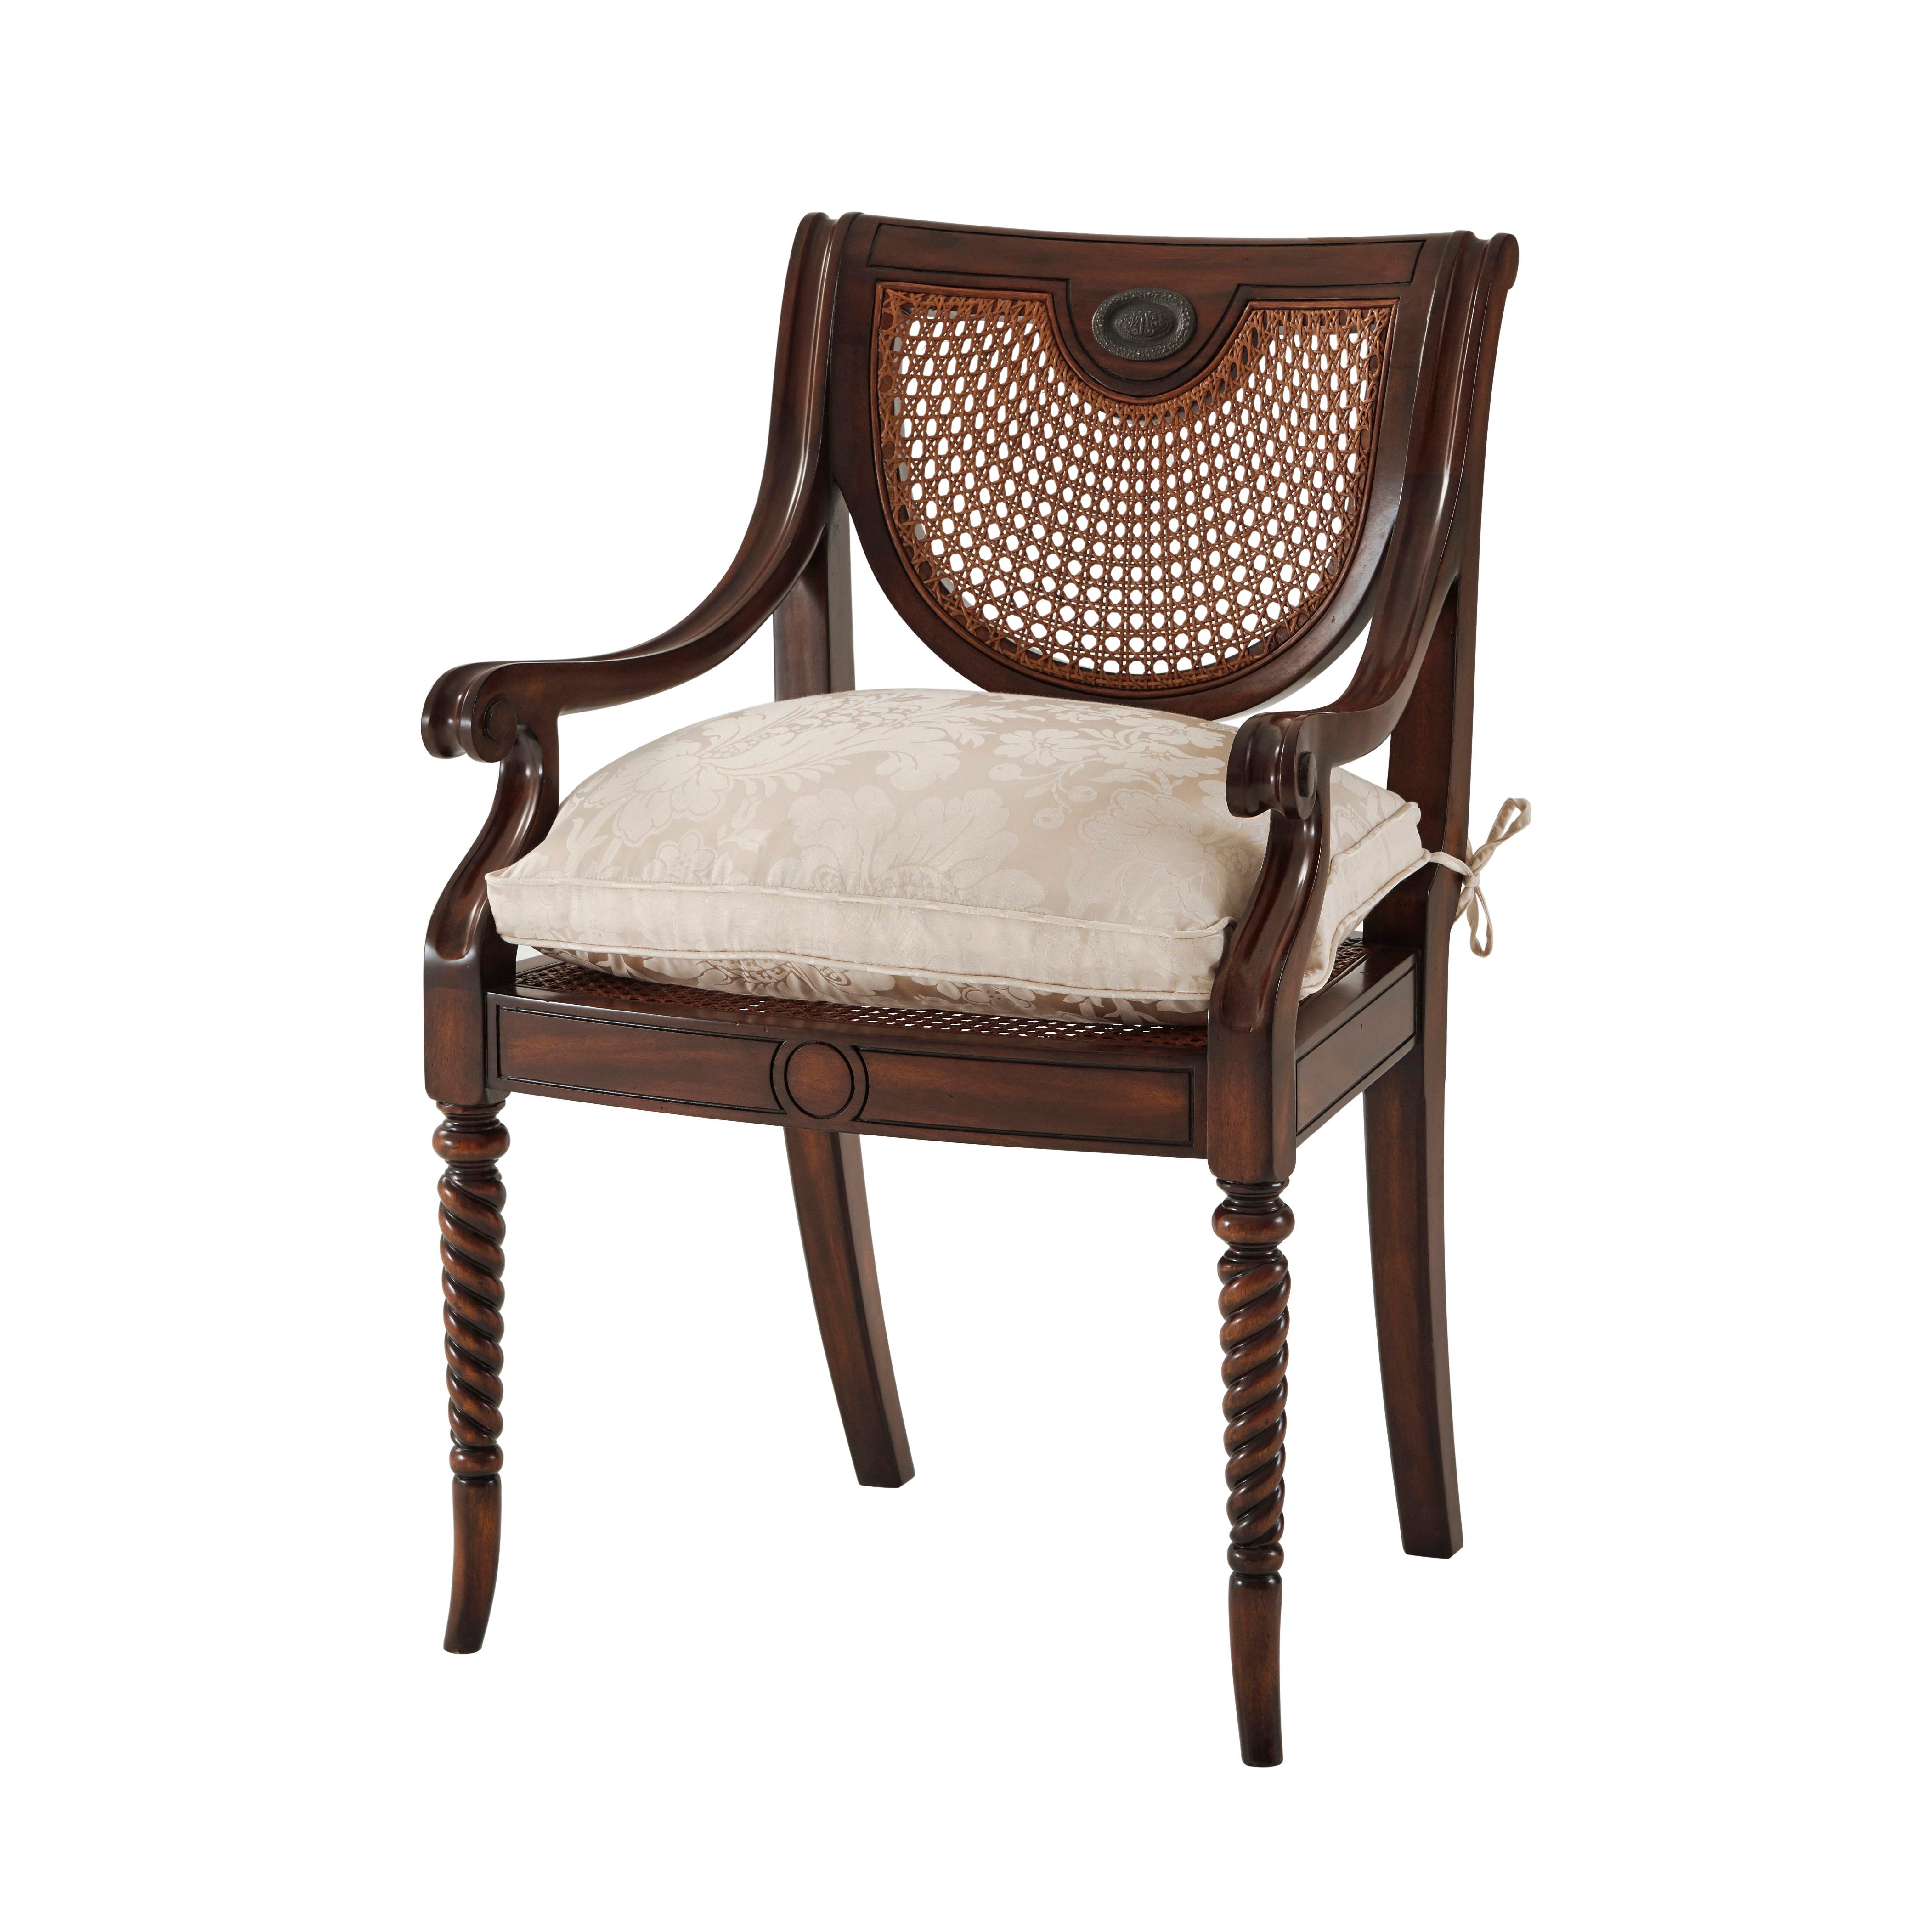 LADY EMILY'S FAVOURITE ARMCHAIR